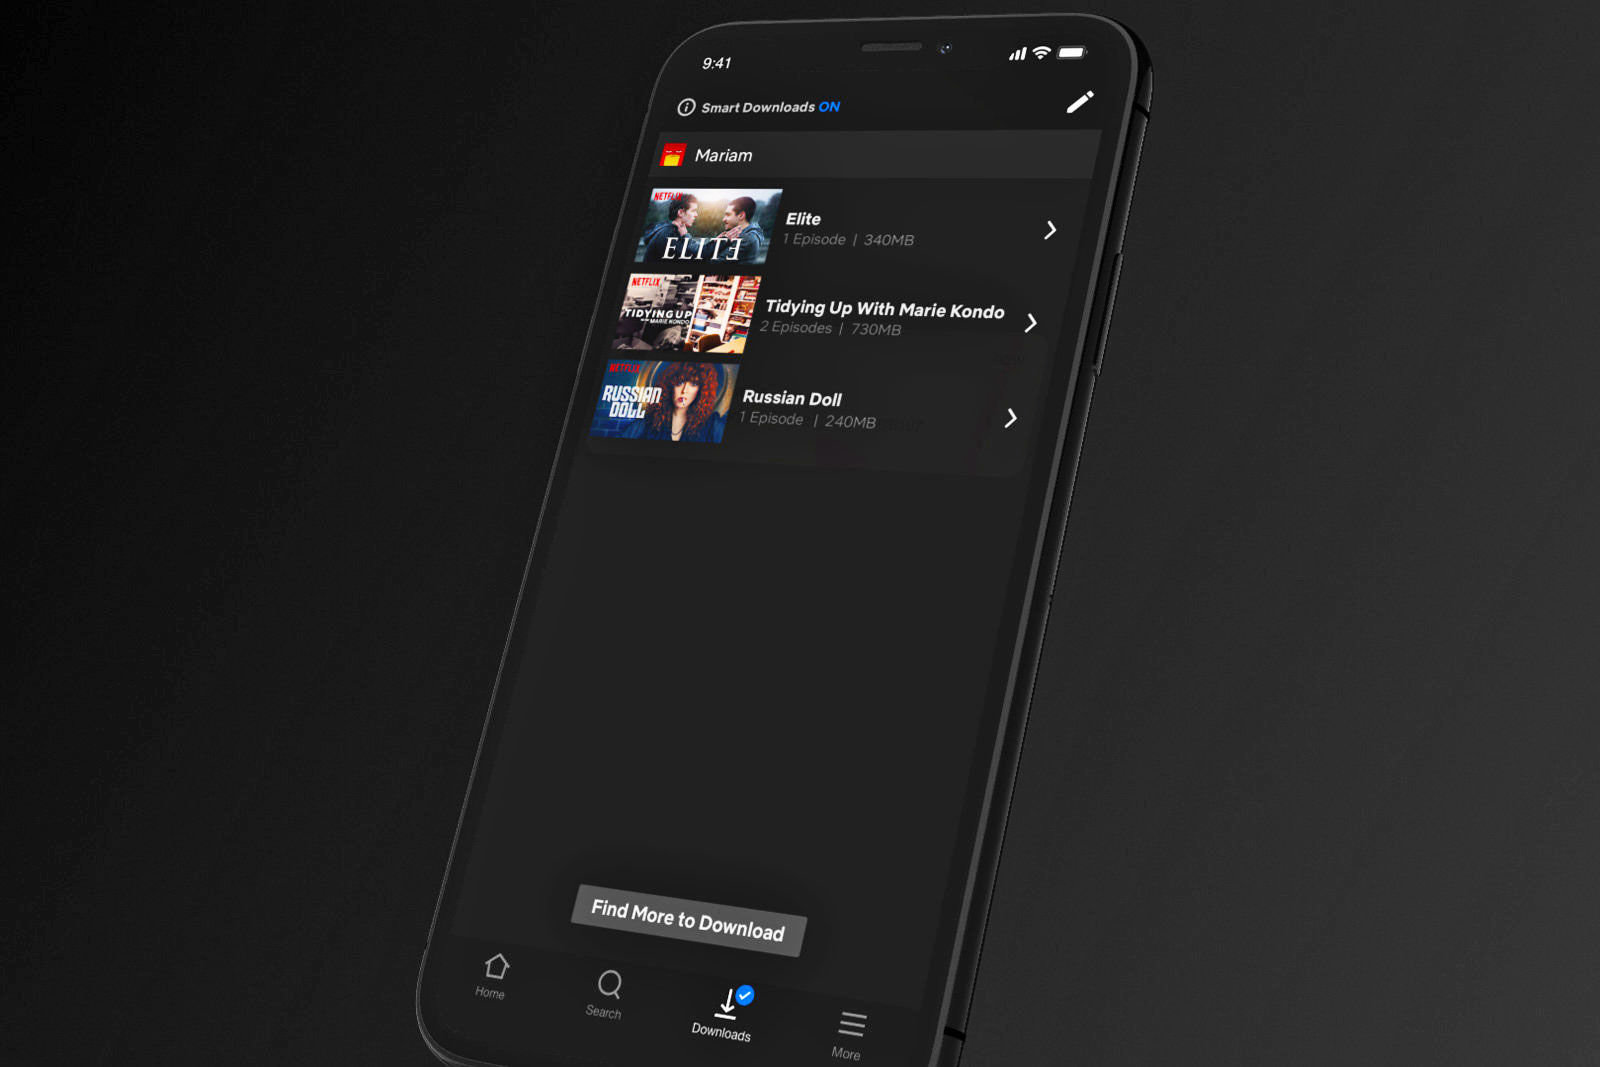 Now You Can Download New Episodes Automatically On Netflix For iOS